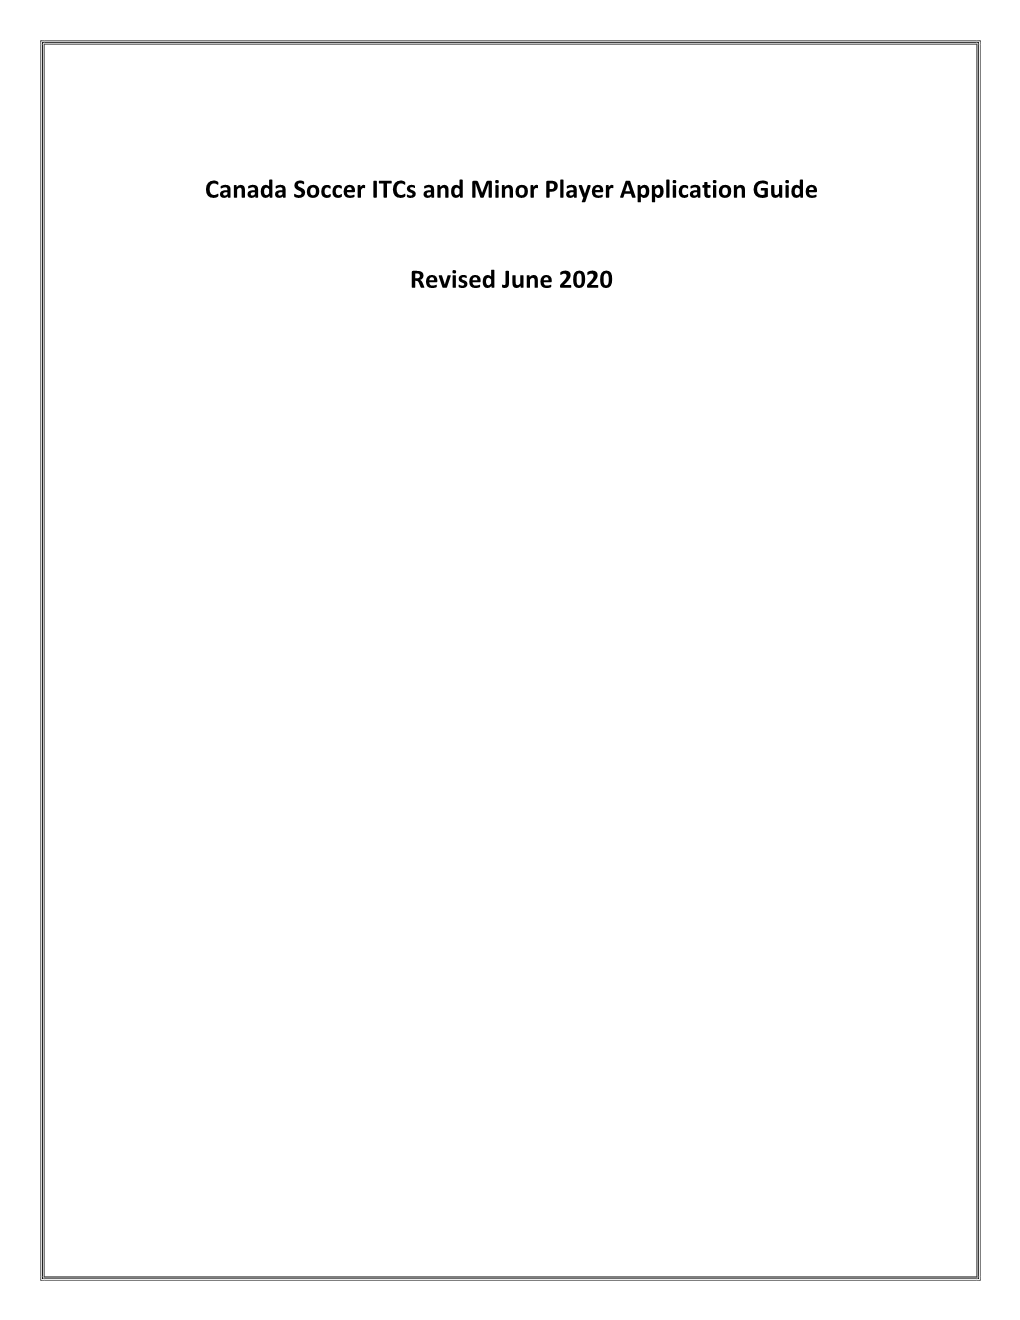 Canada Soccer Itcs and Minor Player Application Guide Revised June